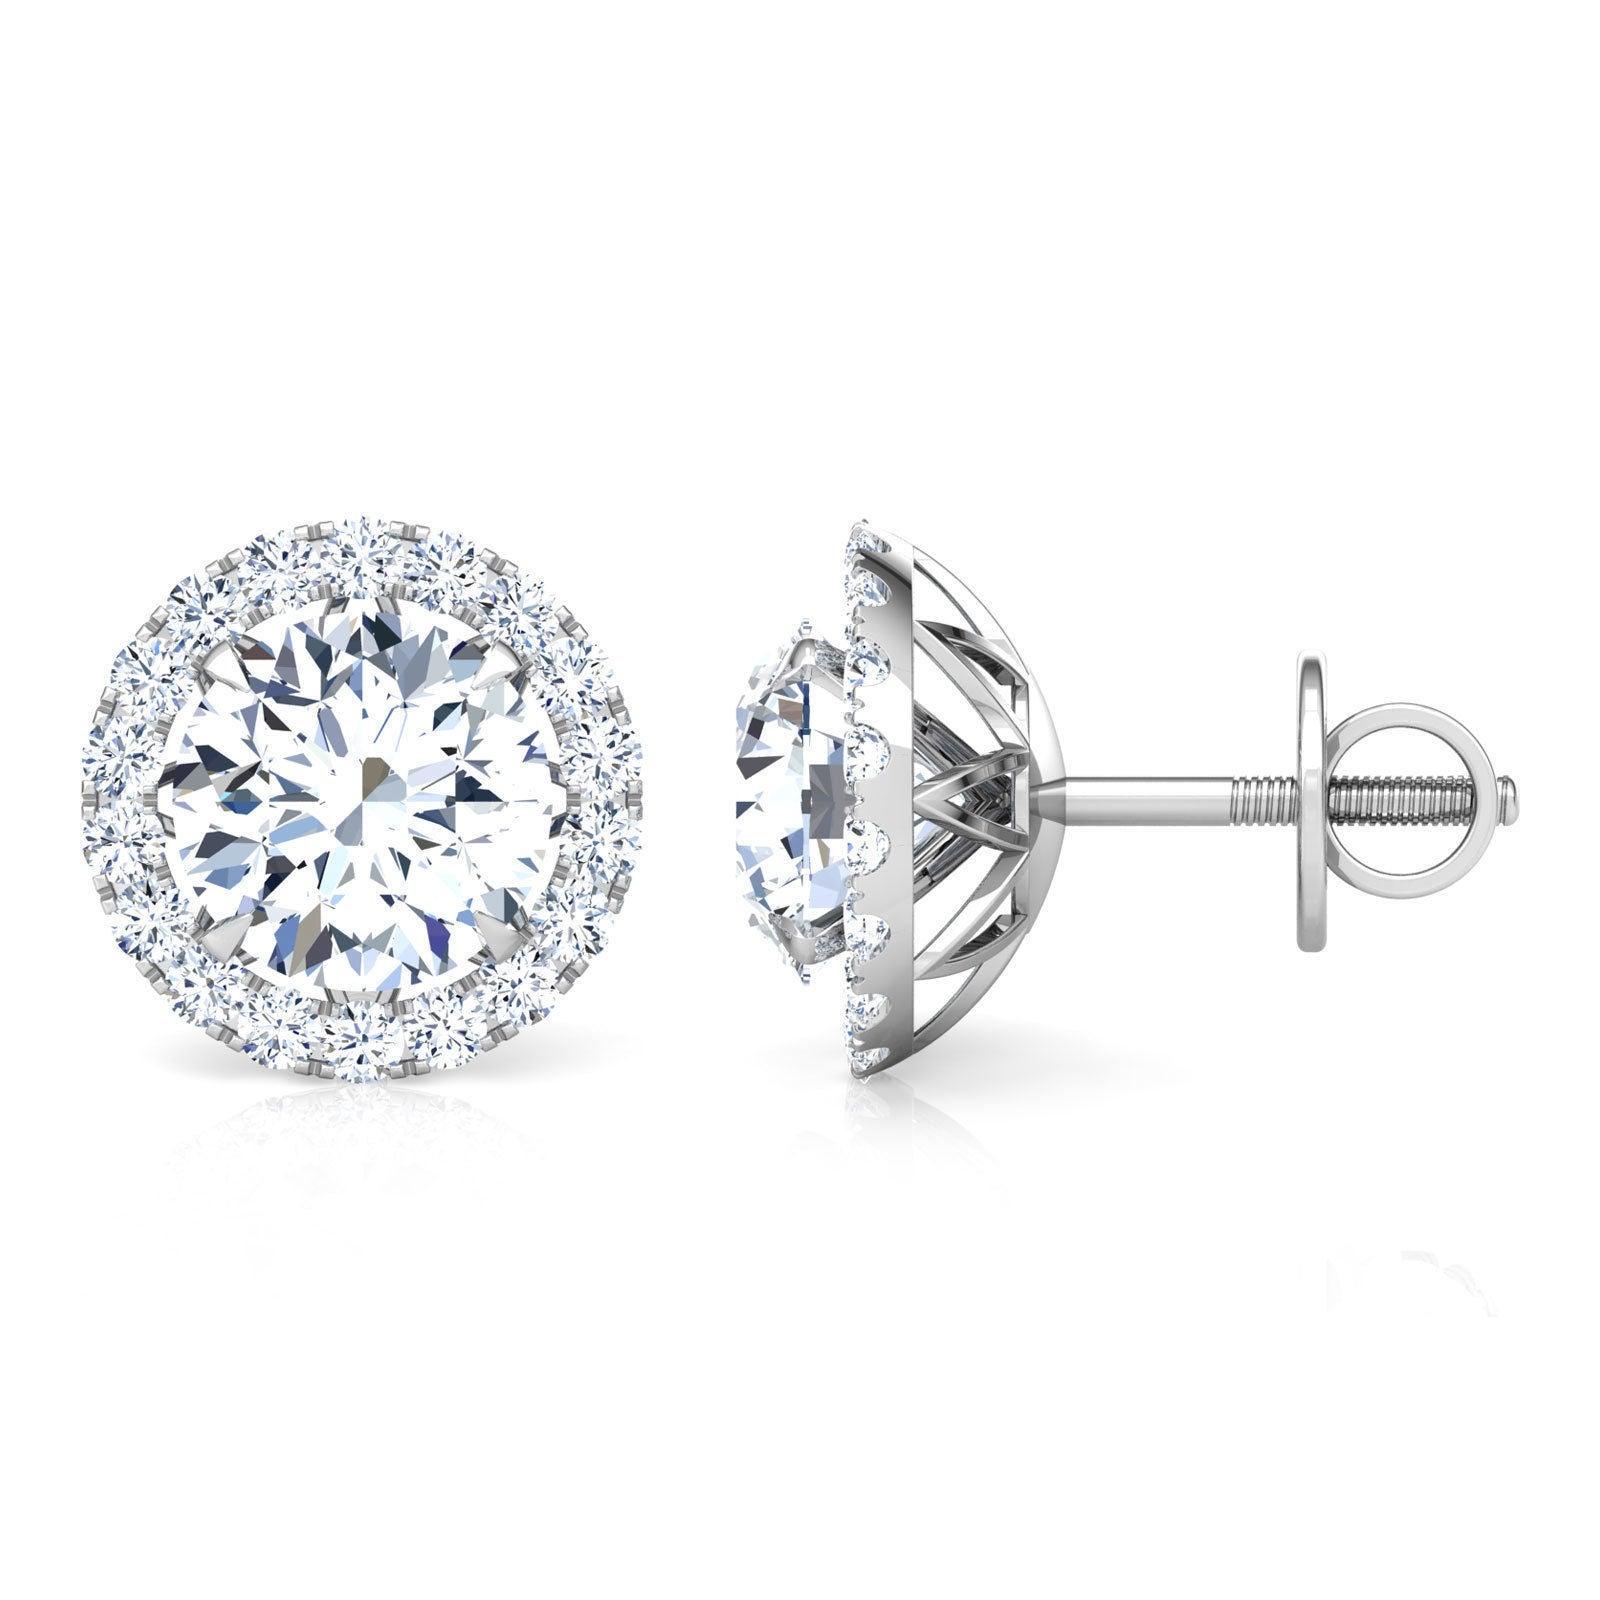 Chelsea round diamond halo earrings.  Image showing the beautiful detail of this setting. 